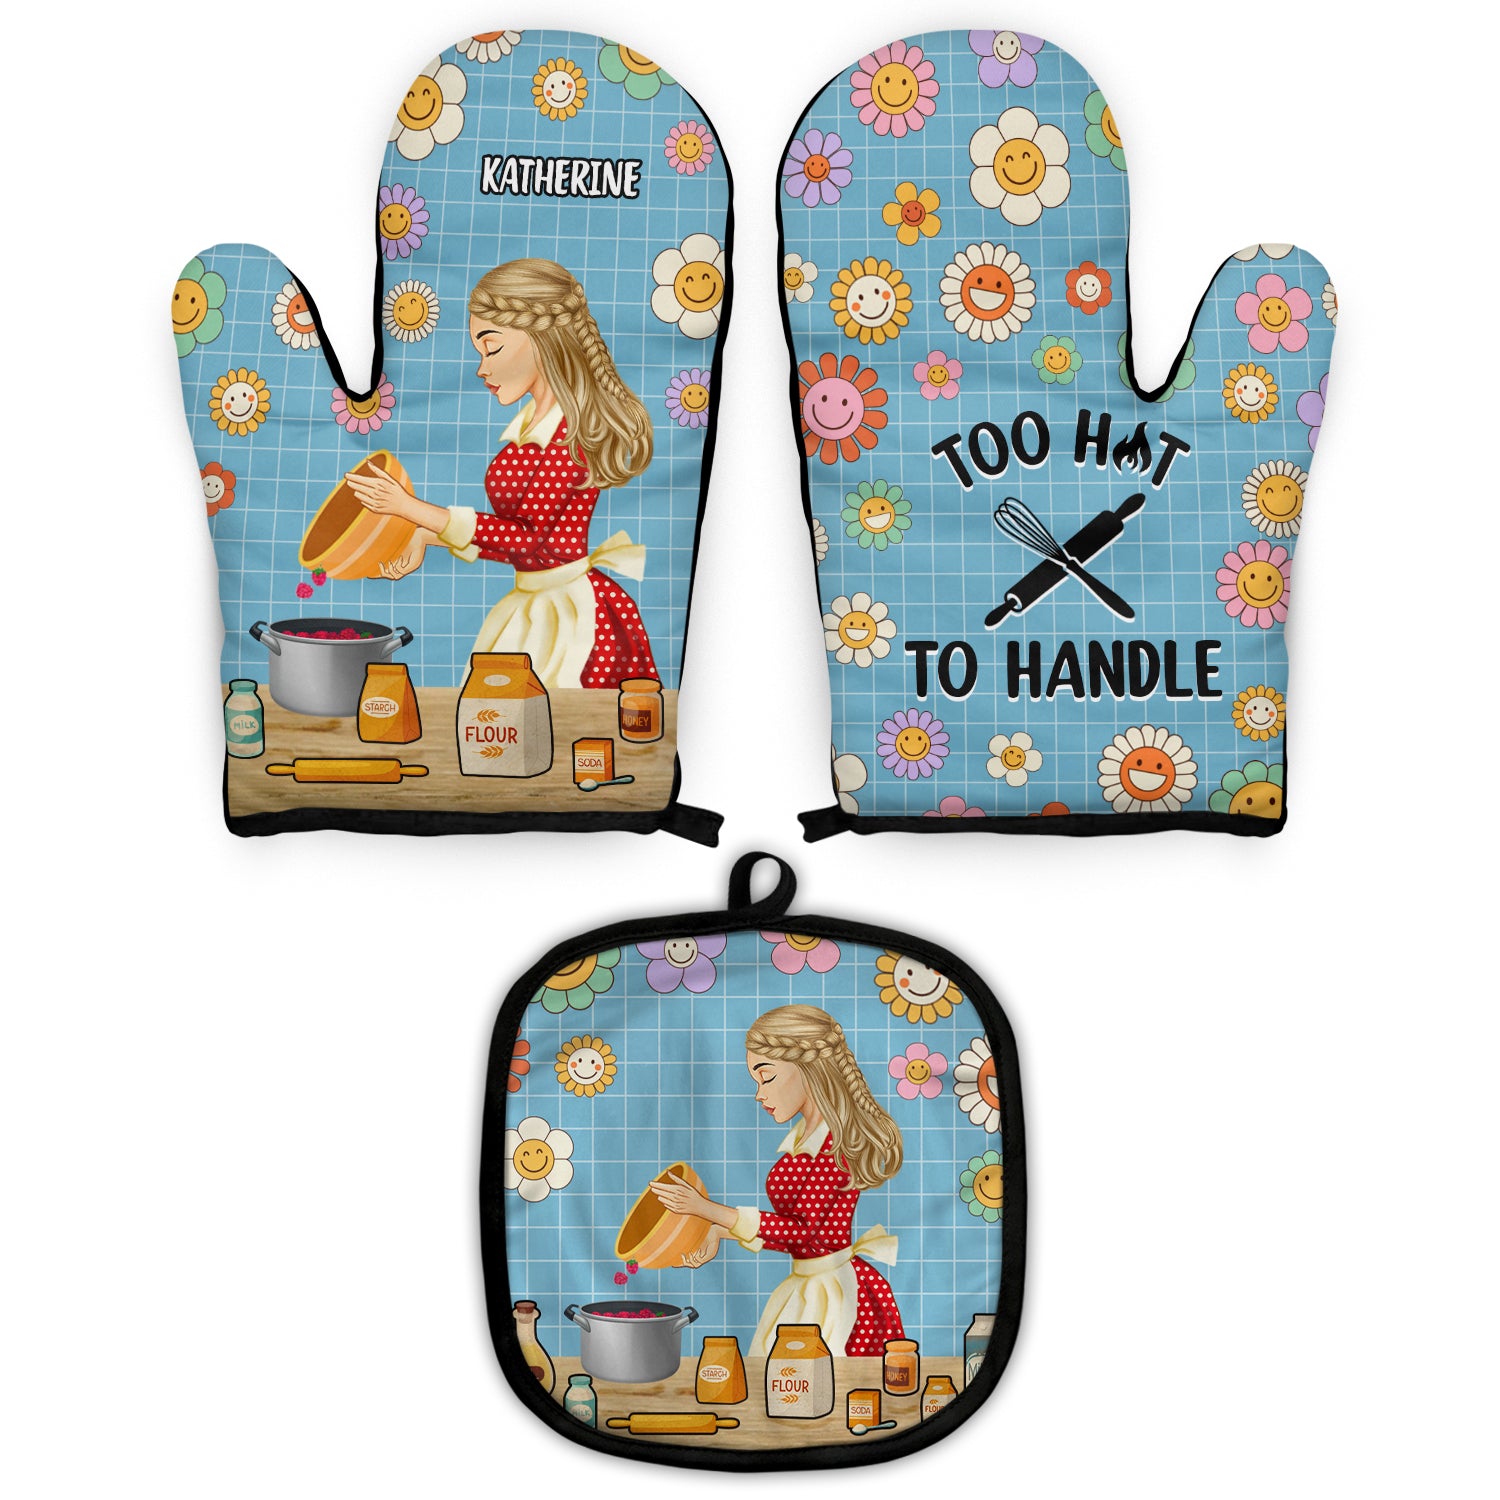 Too Hot To Handle - Gift For Women, Mom, Mother - Personalized Oven Mitts, Pot Holders